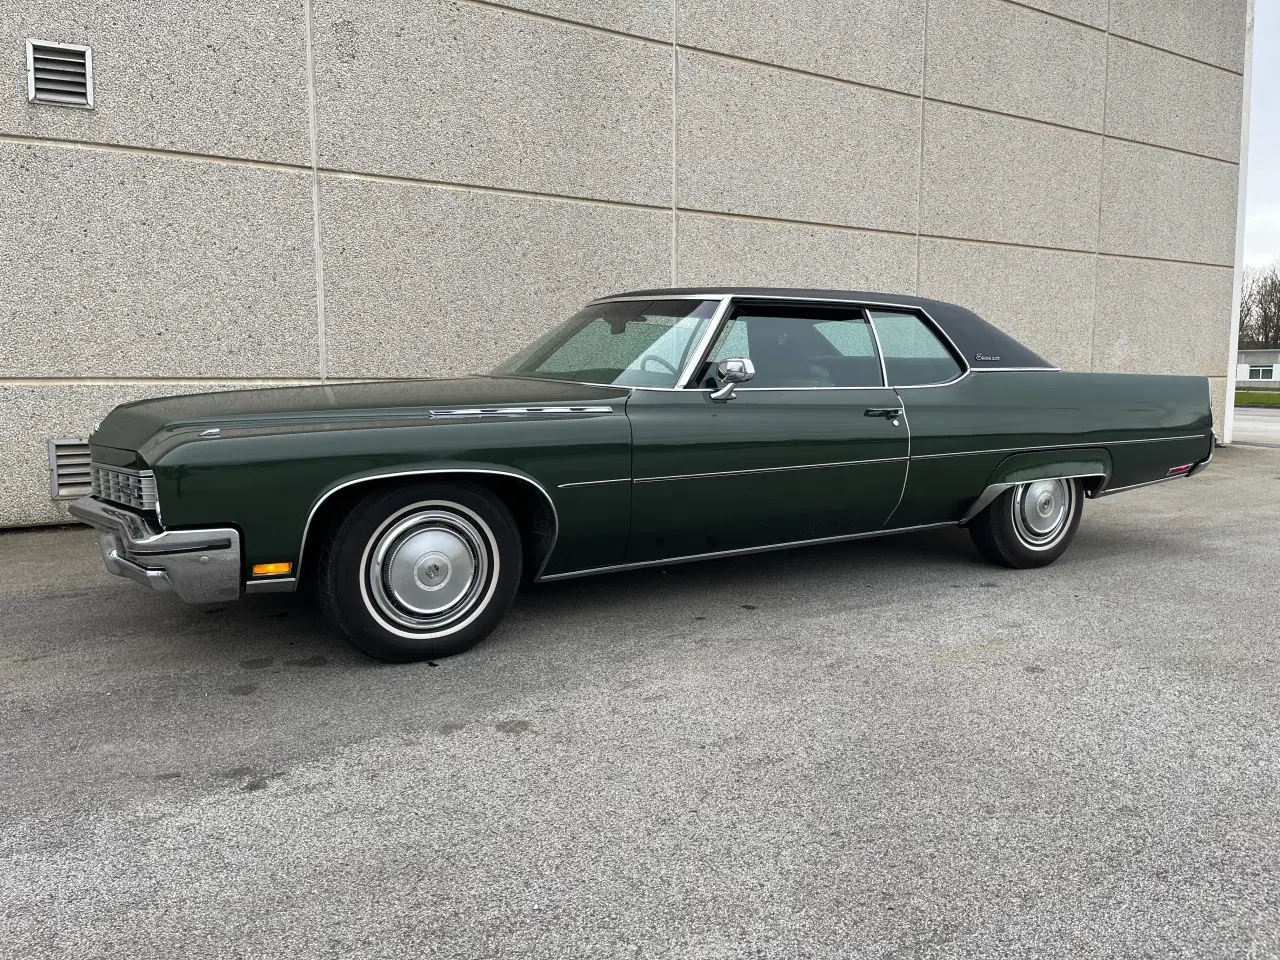 Billede 6 - Buick Electra 225 coupe